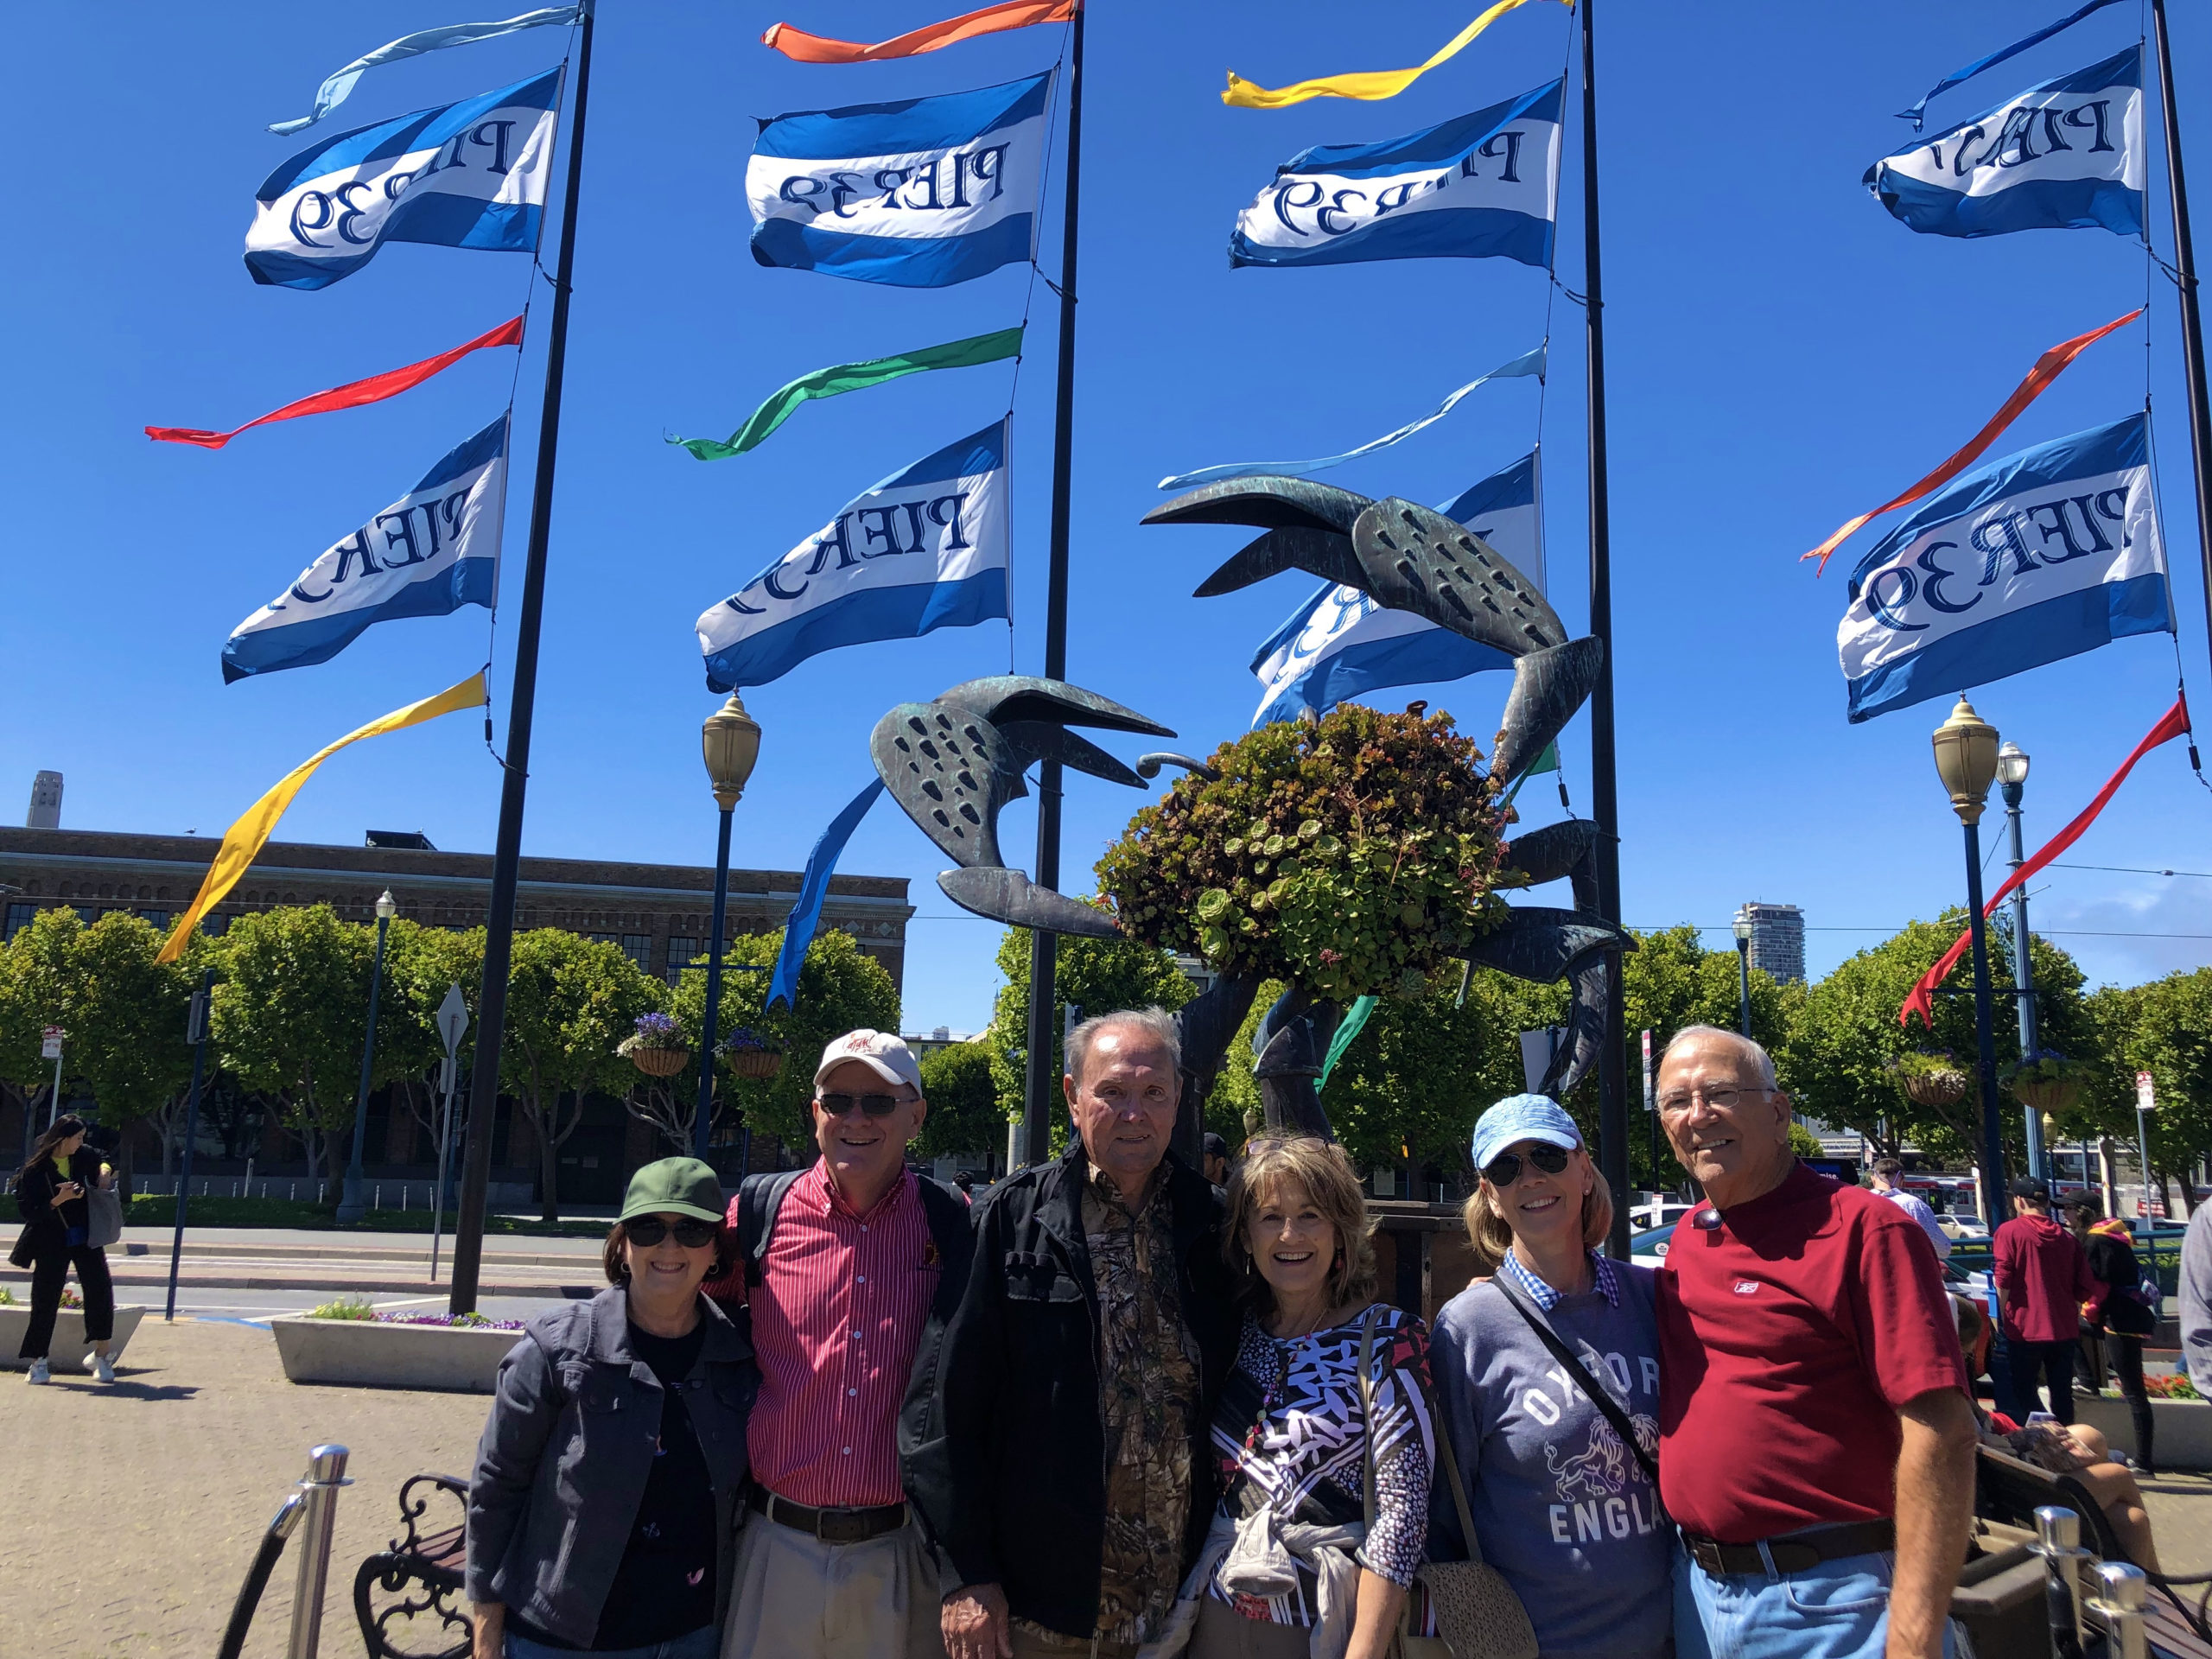 ExperienceFirst tour group at Pier 39 for the Fisherman's Wharf Walking Tour